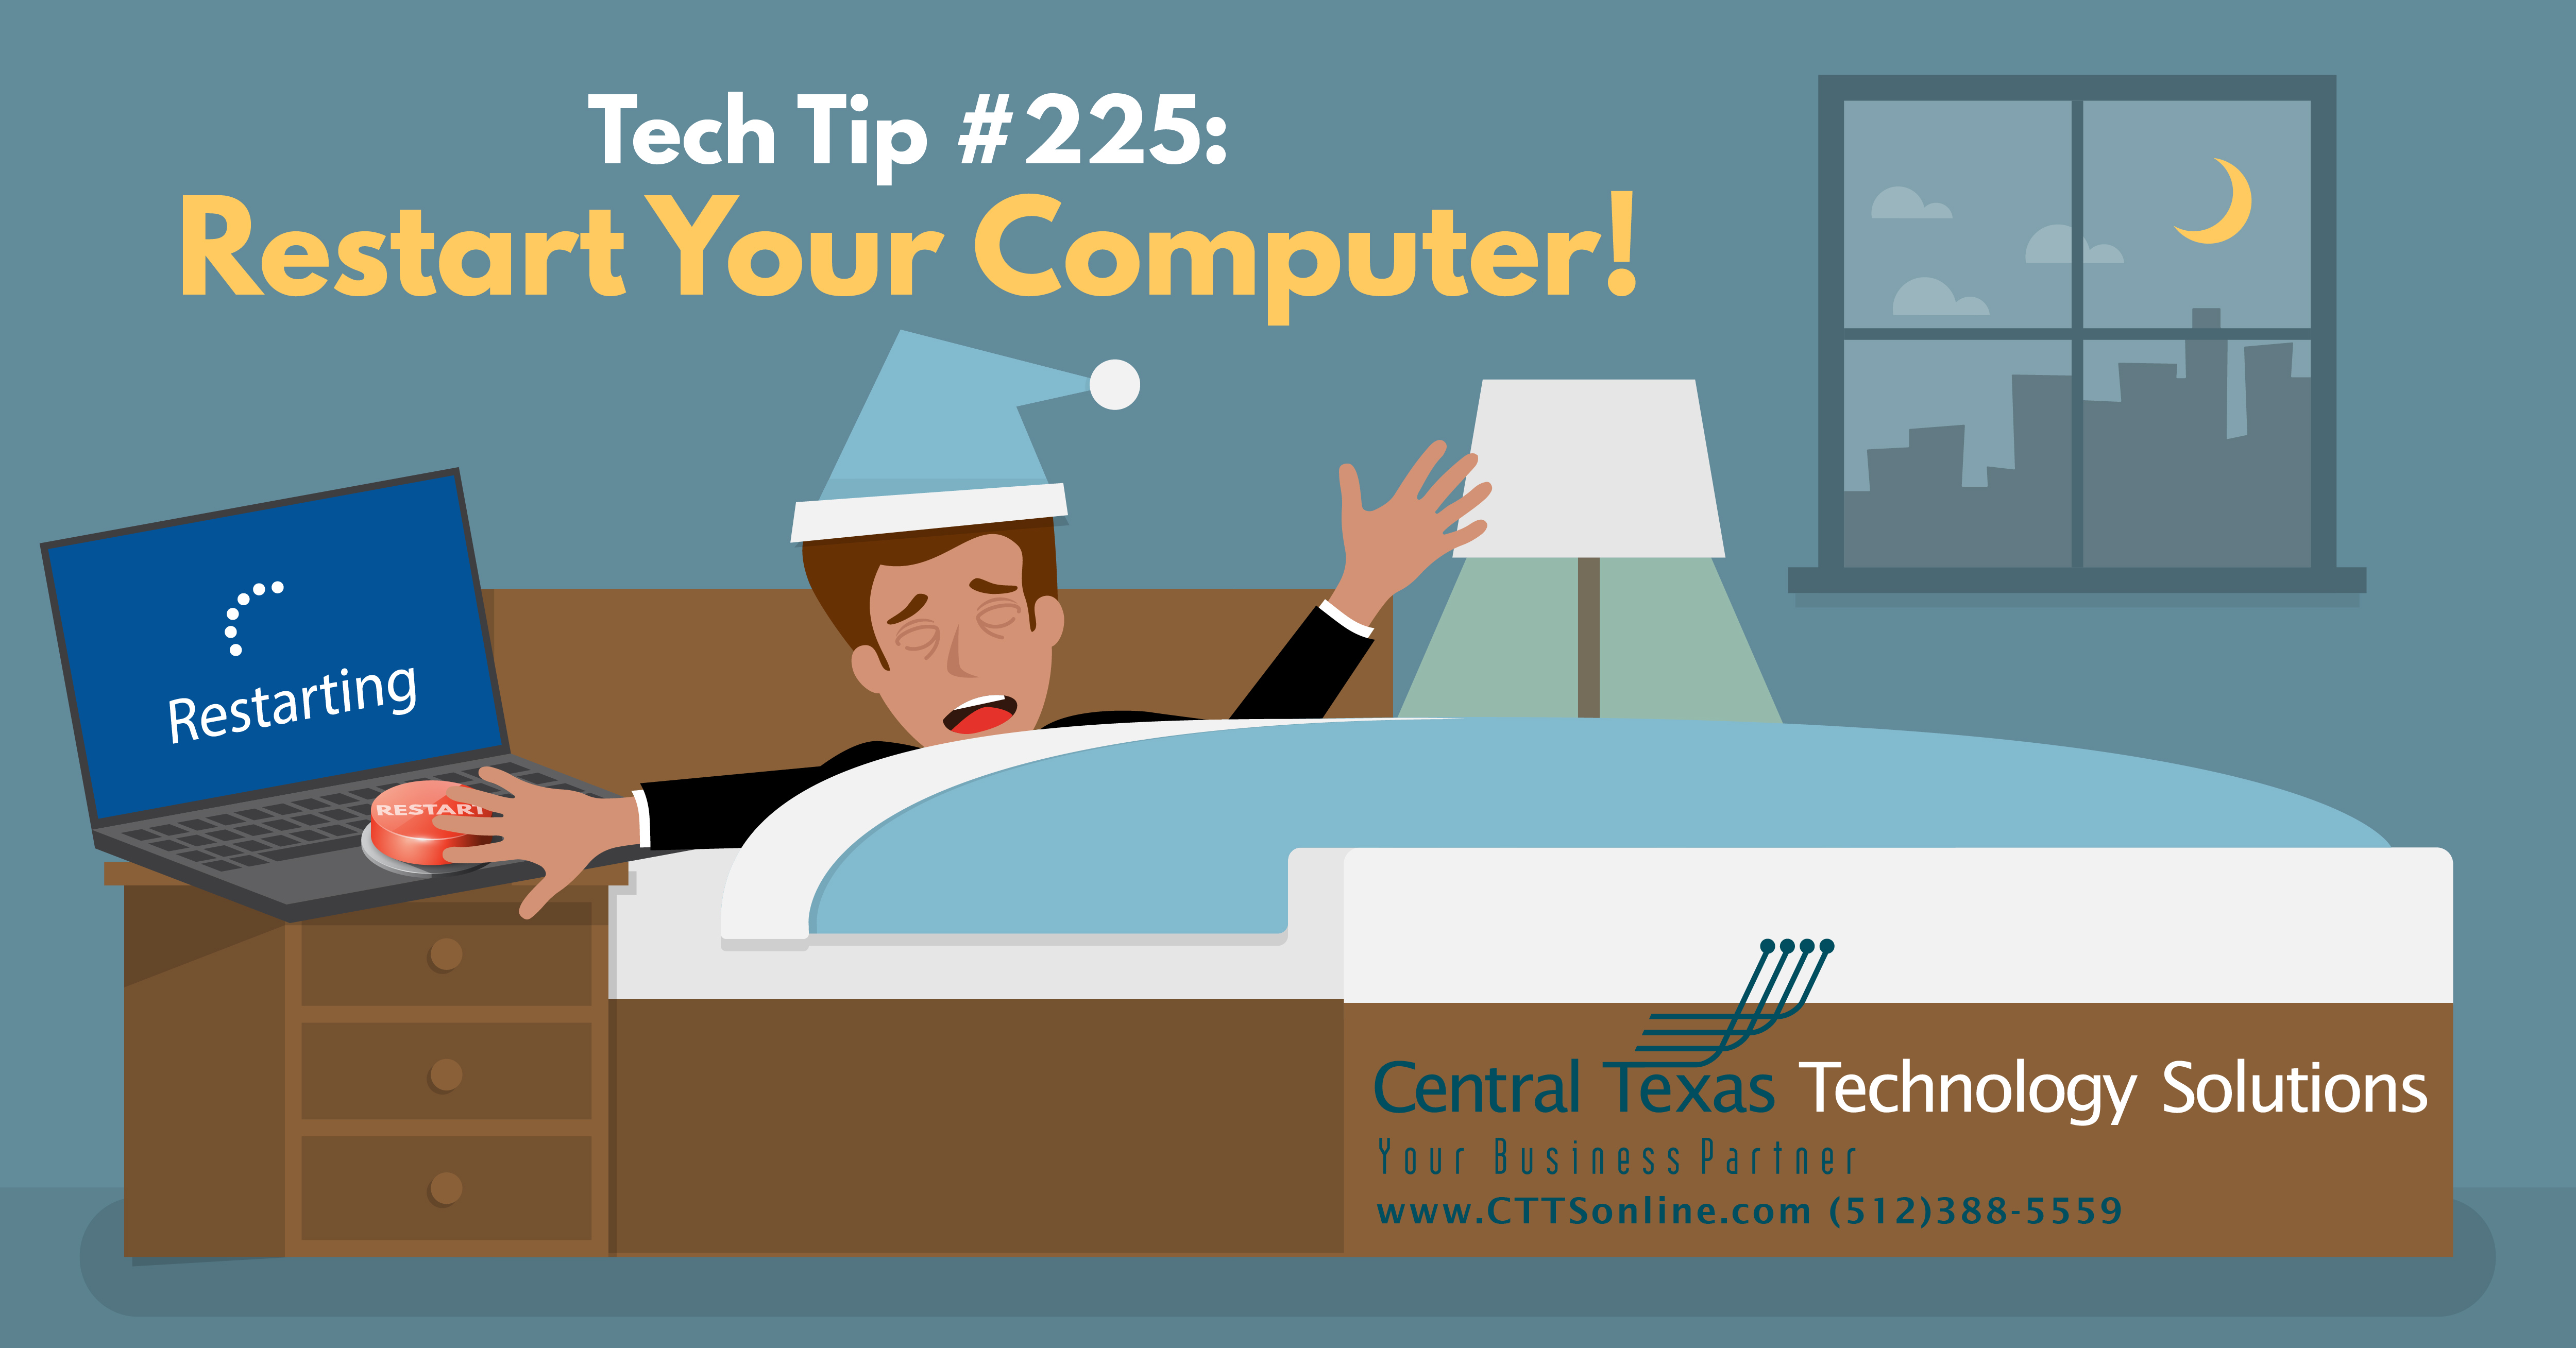 Restart your computer: Sometimes restarting your computer can resolve communication issues between the computer and the printer.
Contact technical support: If all else fails, reach out to the printer's manufacturer or a qualified technician for further assistance.